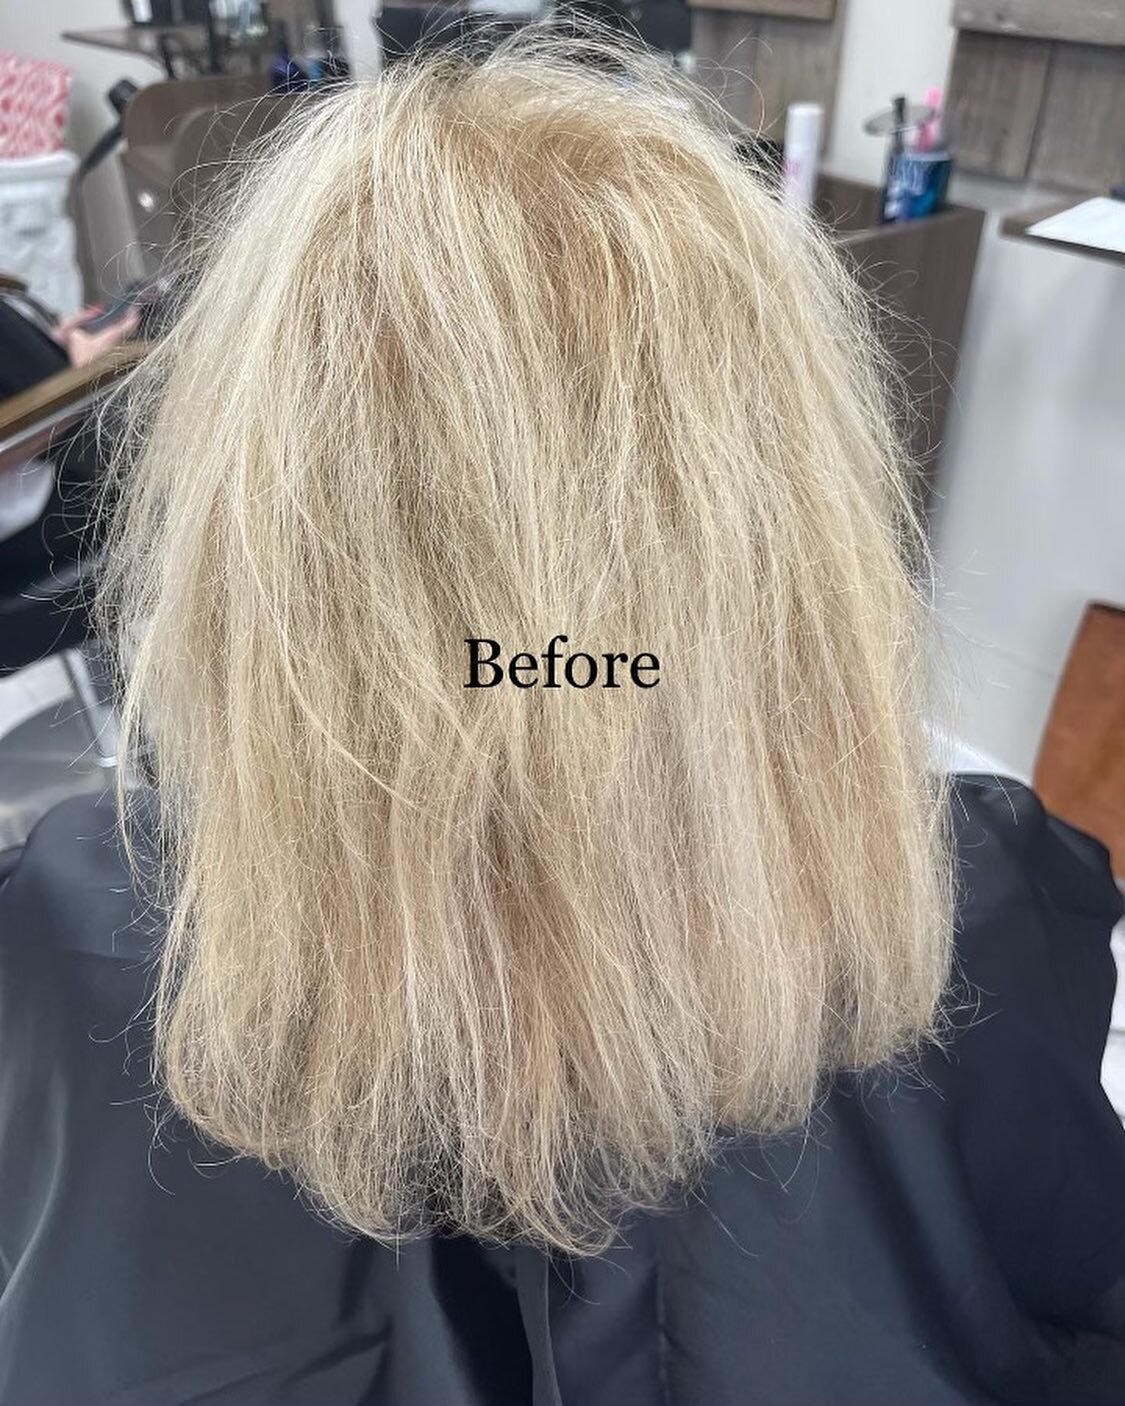 Extensions aren&rsquo;t always for length! This client just wanted more volume, without a drastic change. 
Keratin Tip extension install by @styledbycait_ 
&bull;
&bull;
&bull;
#hairextensions #bellamihairpro #stoneharborsalon #southjerseyhairstylist